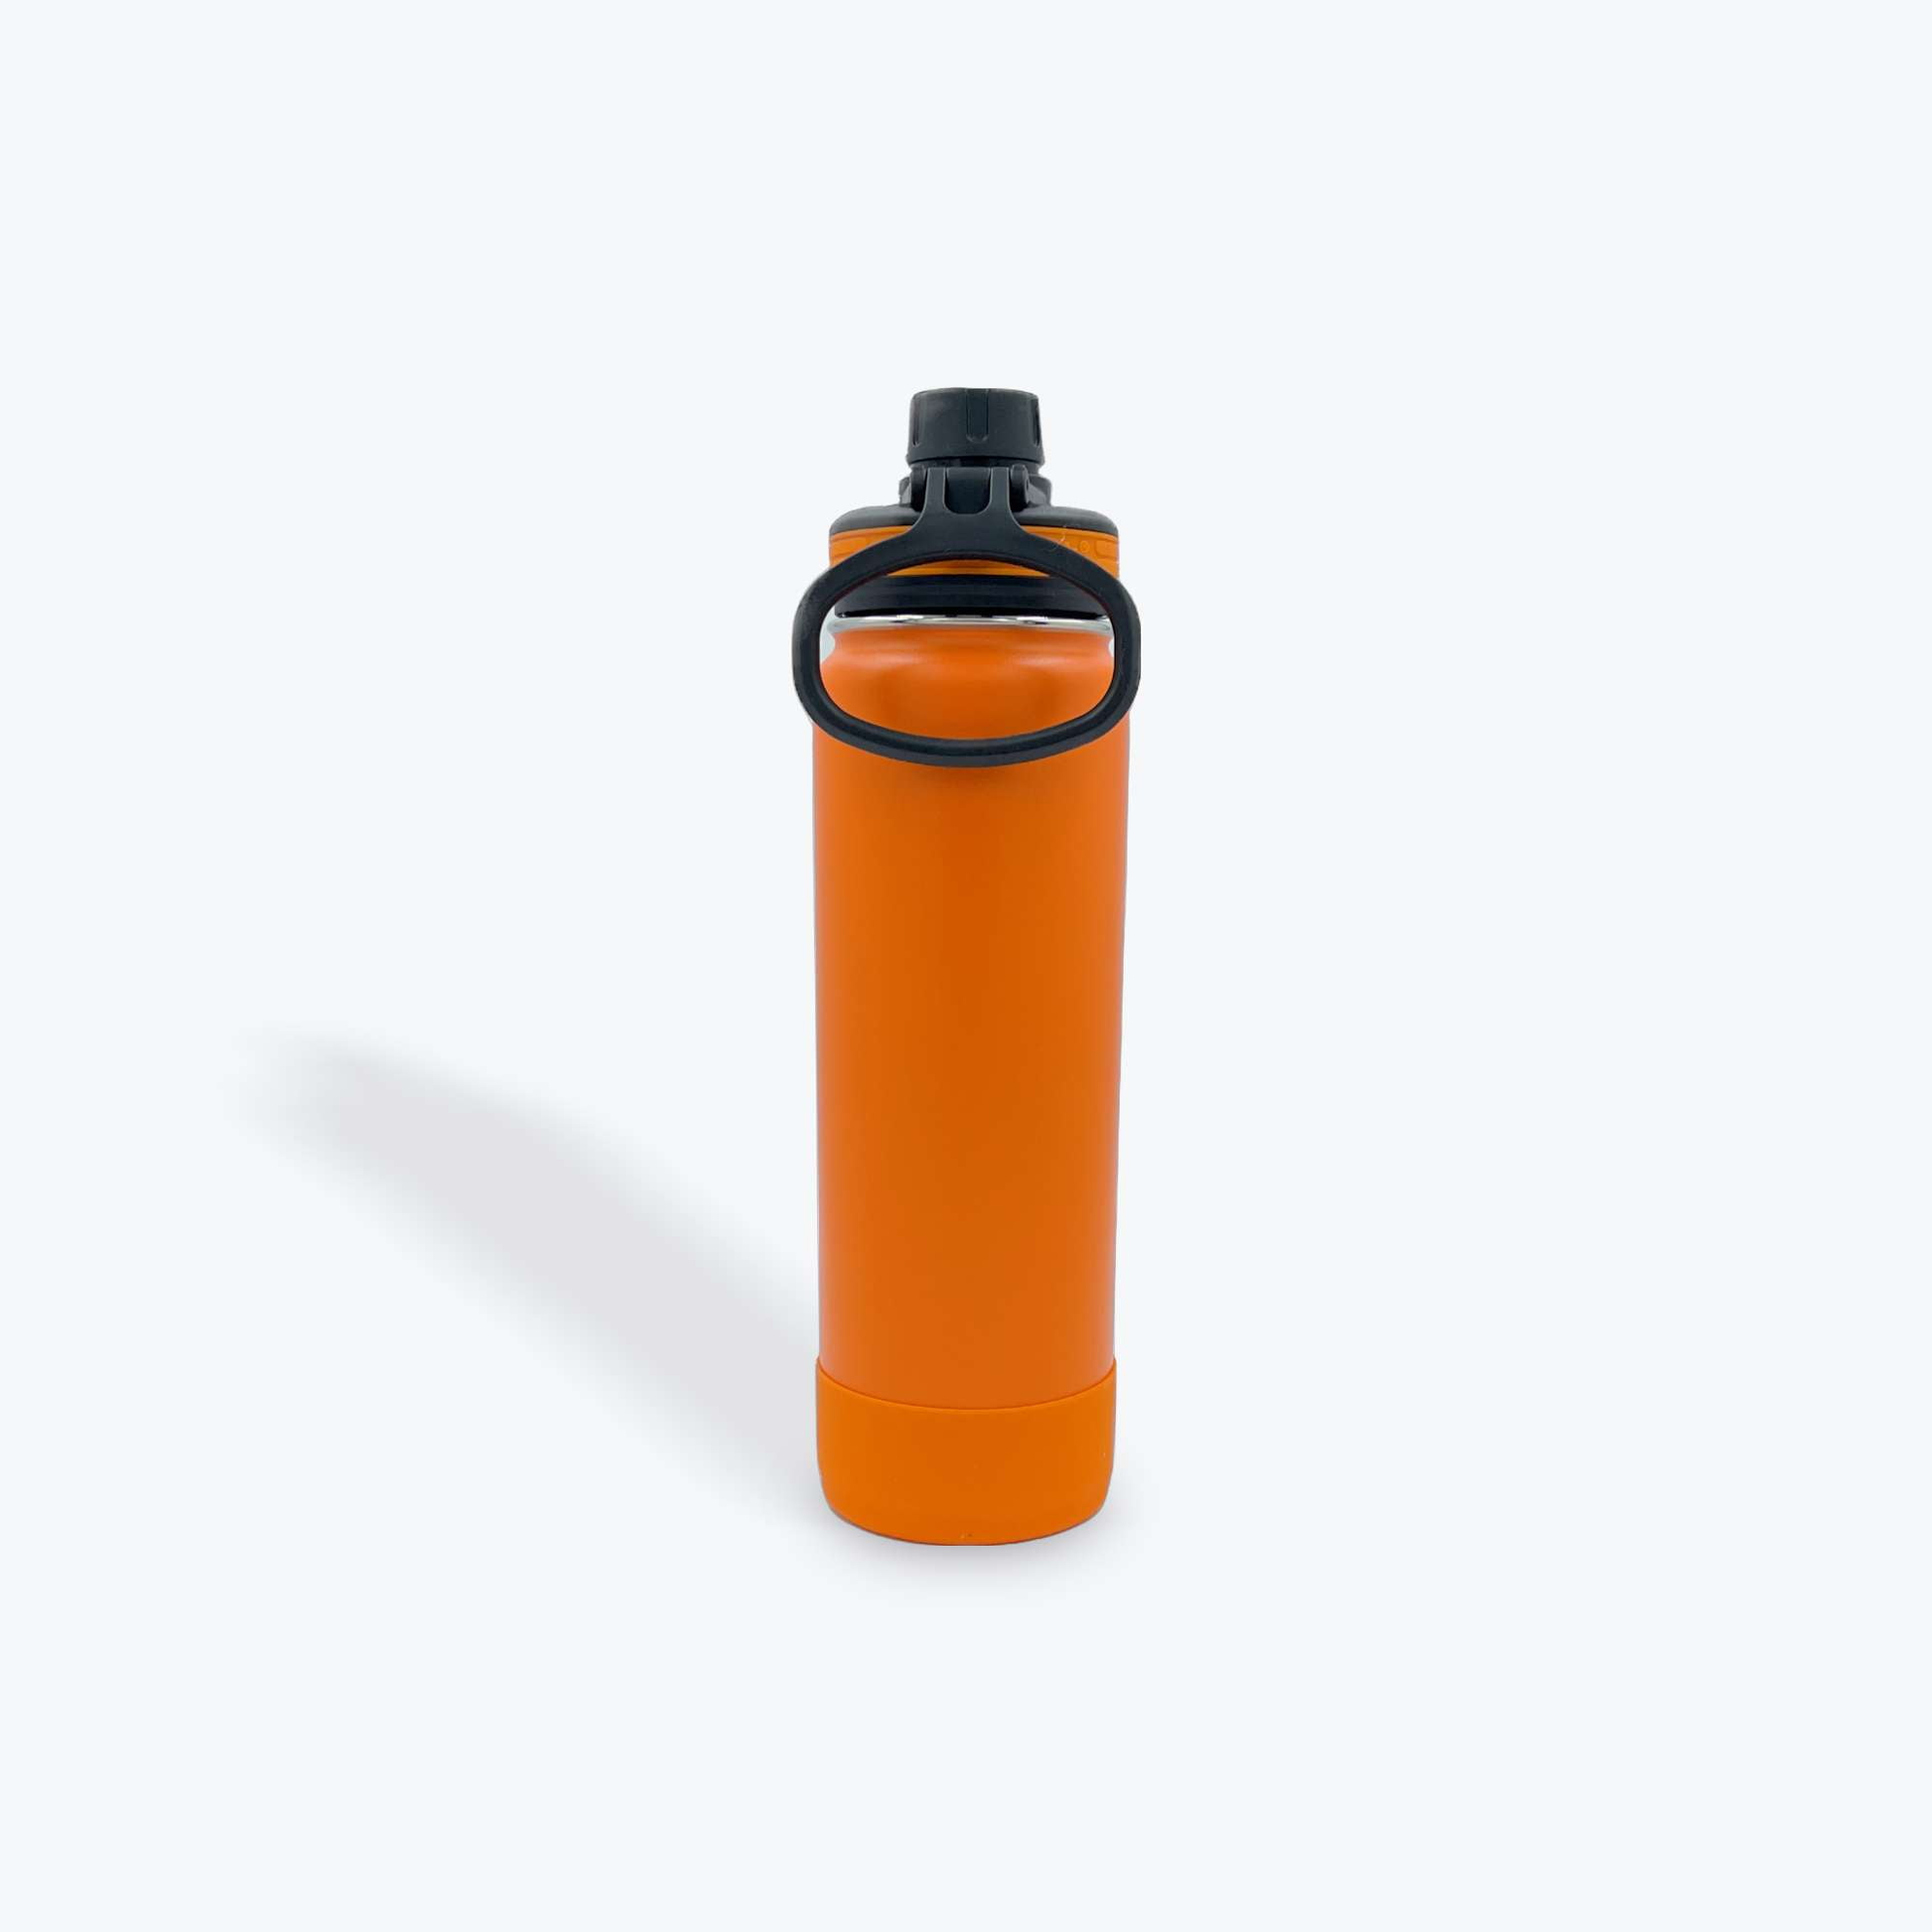 ThermoFlask 24 oz Insulated Stainless Steel Straw Tumbler